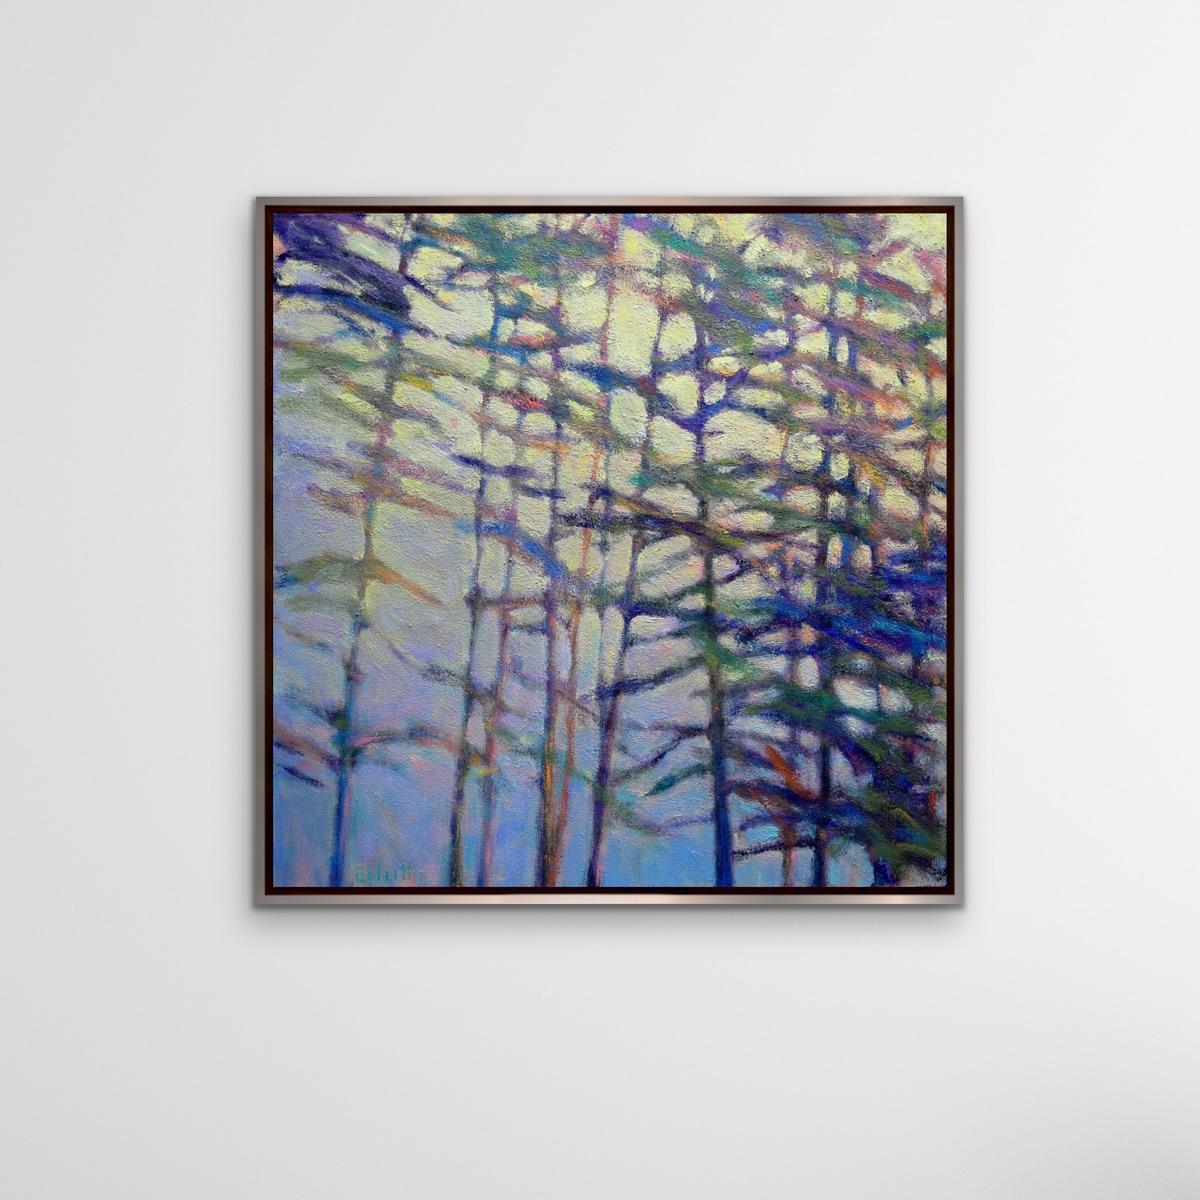 'Colors in the Breeze III' 2021 by American artist, Ken Elliott. Oil on canvas, 30 x 30 in. / Frame: 31.5 x 31.5 in. This painting of a forest and a field comprises of colors in green, purple, yellow, pink, and blue. Framed in a gold painted